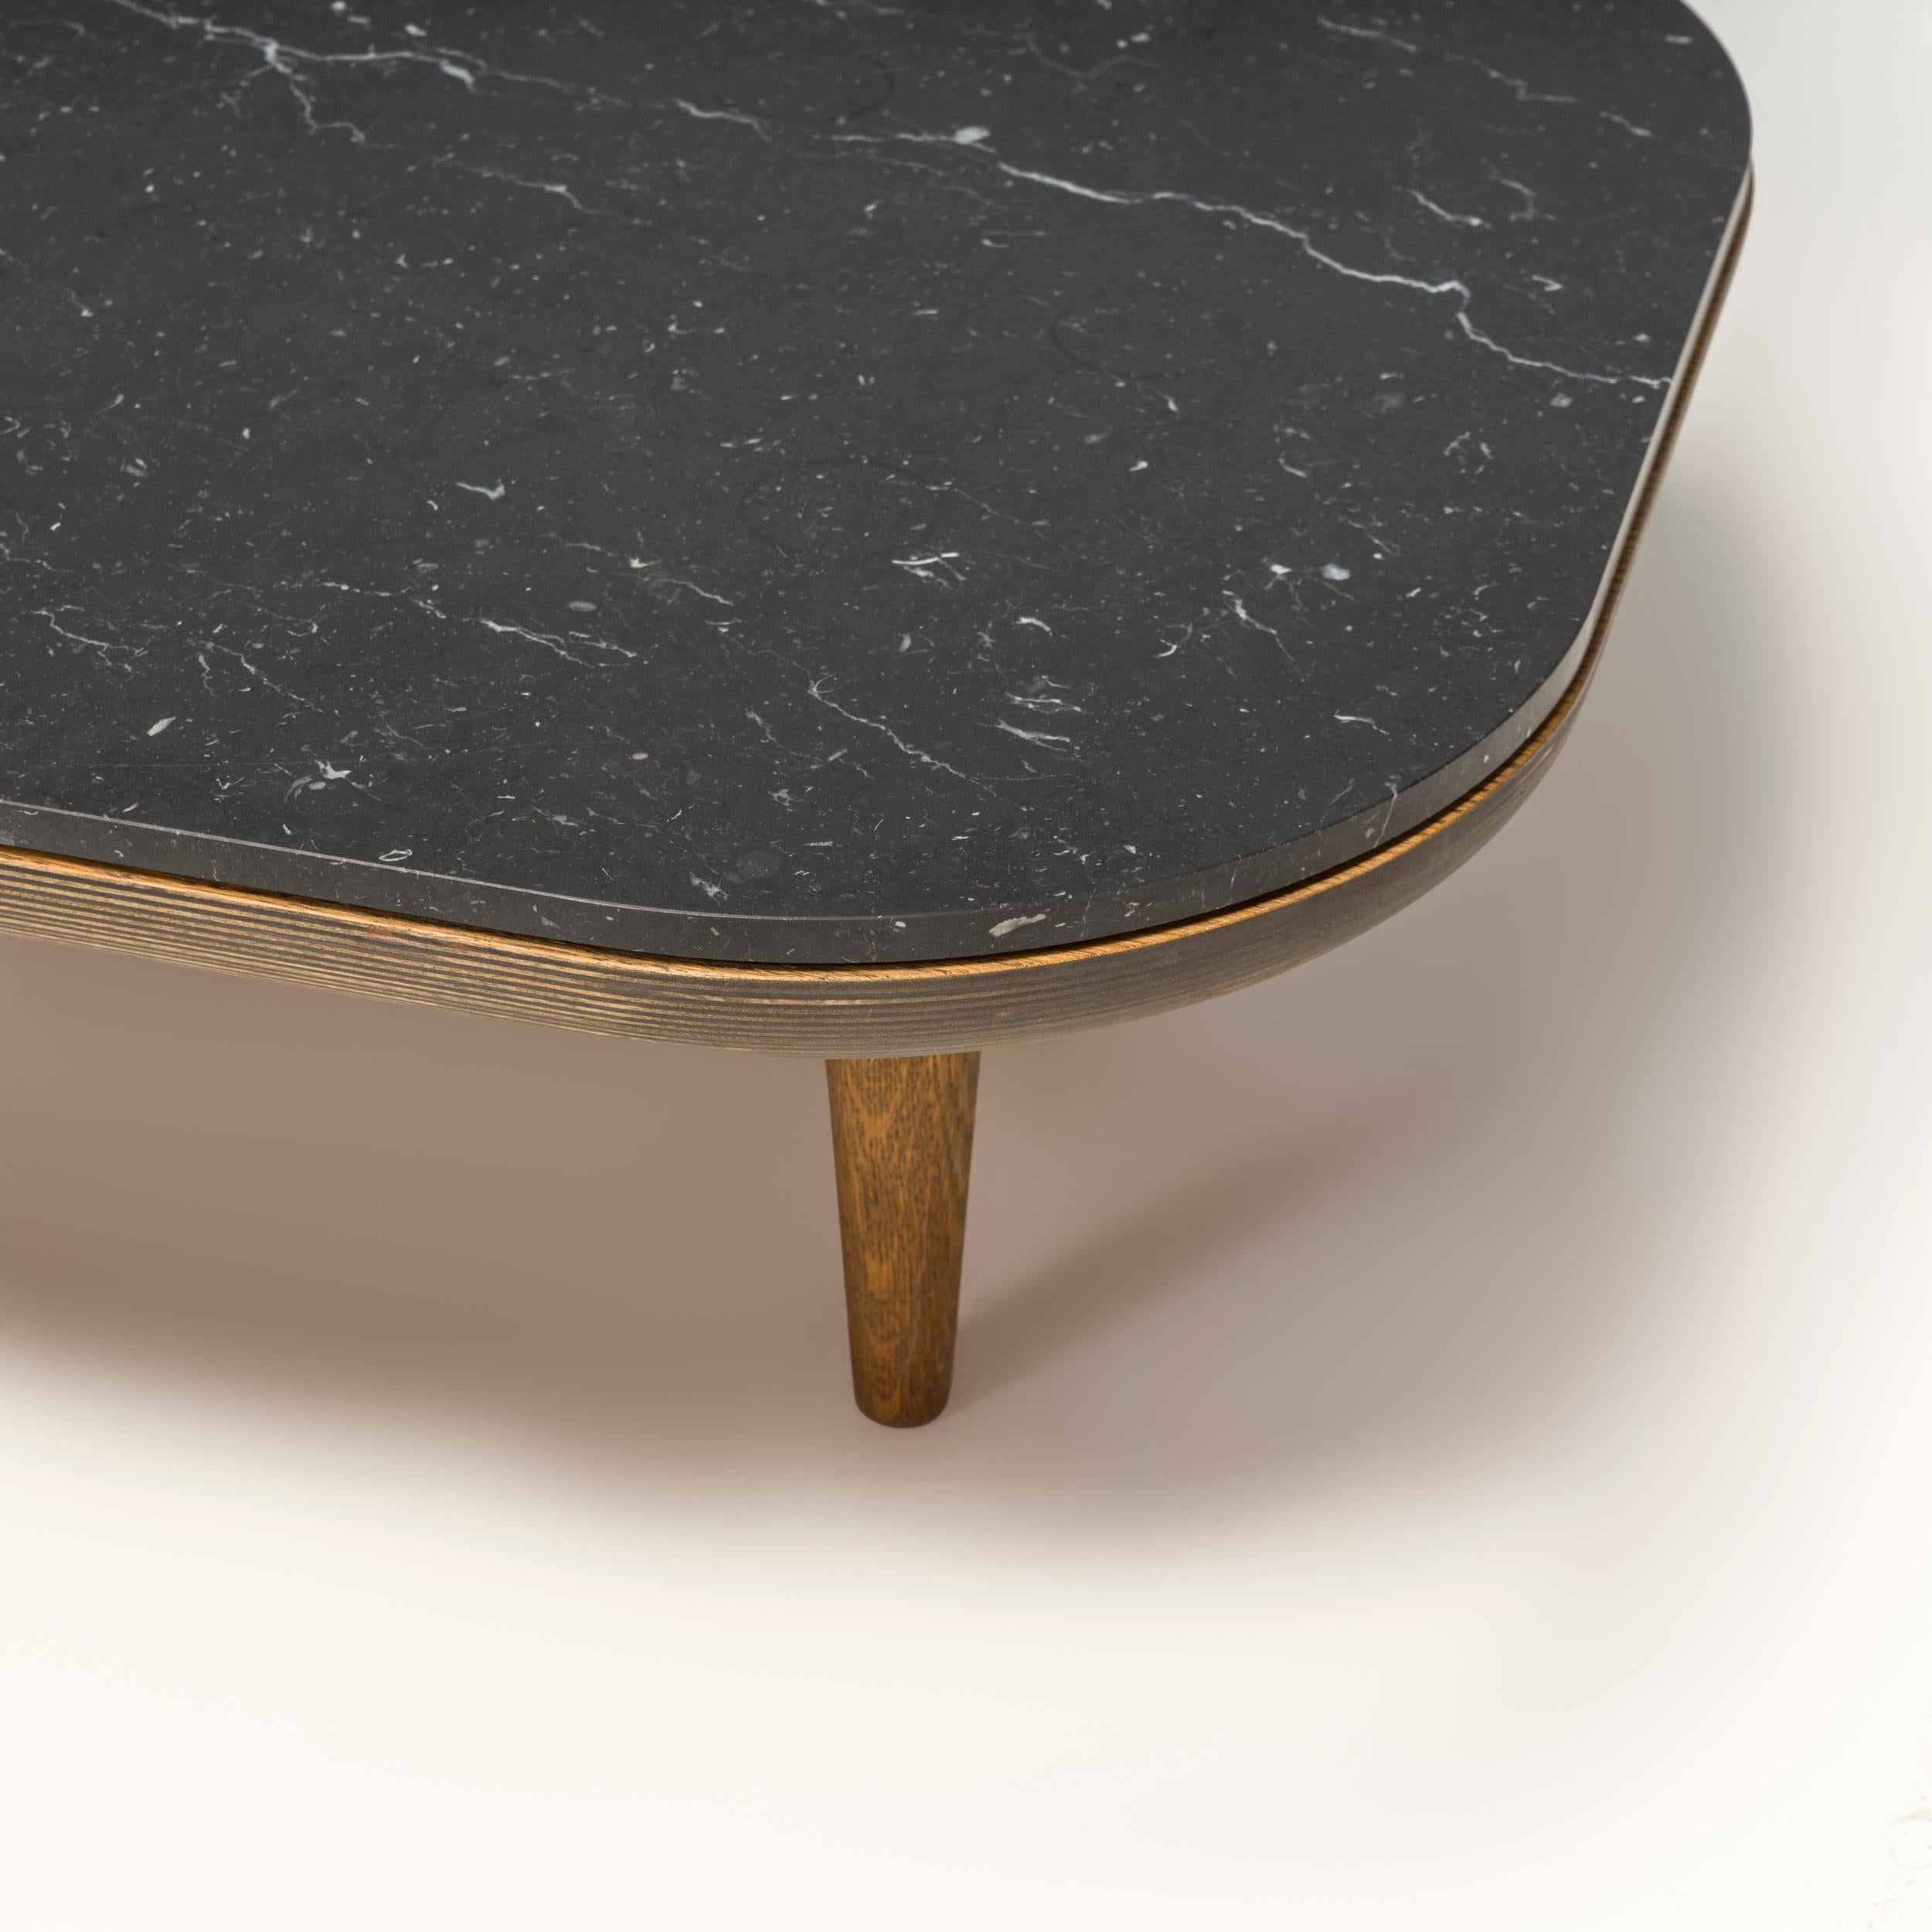 &Tradition By Space Copenhagen Polished Nero Marquina Marble Fly Coffee Table In Good Condition For Sale In London, GB